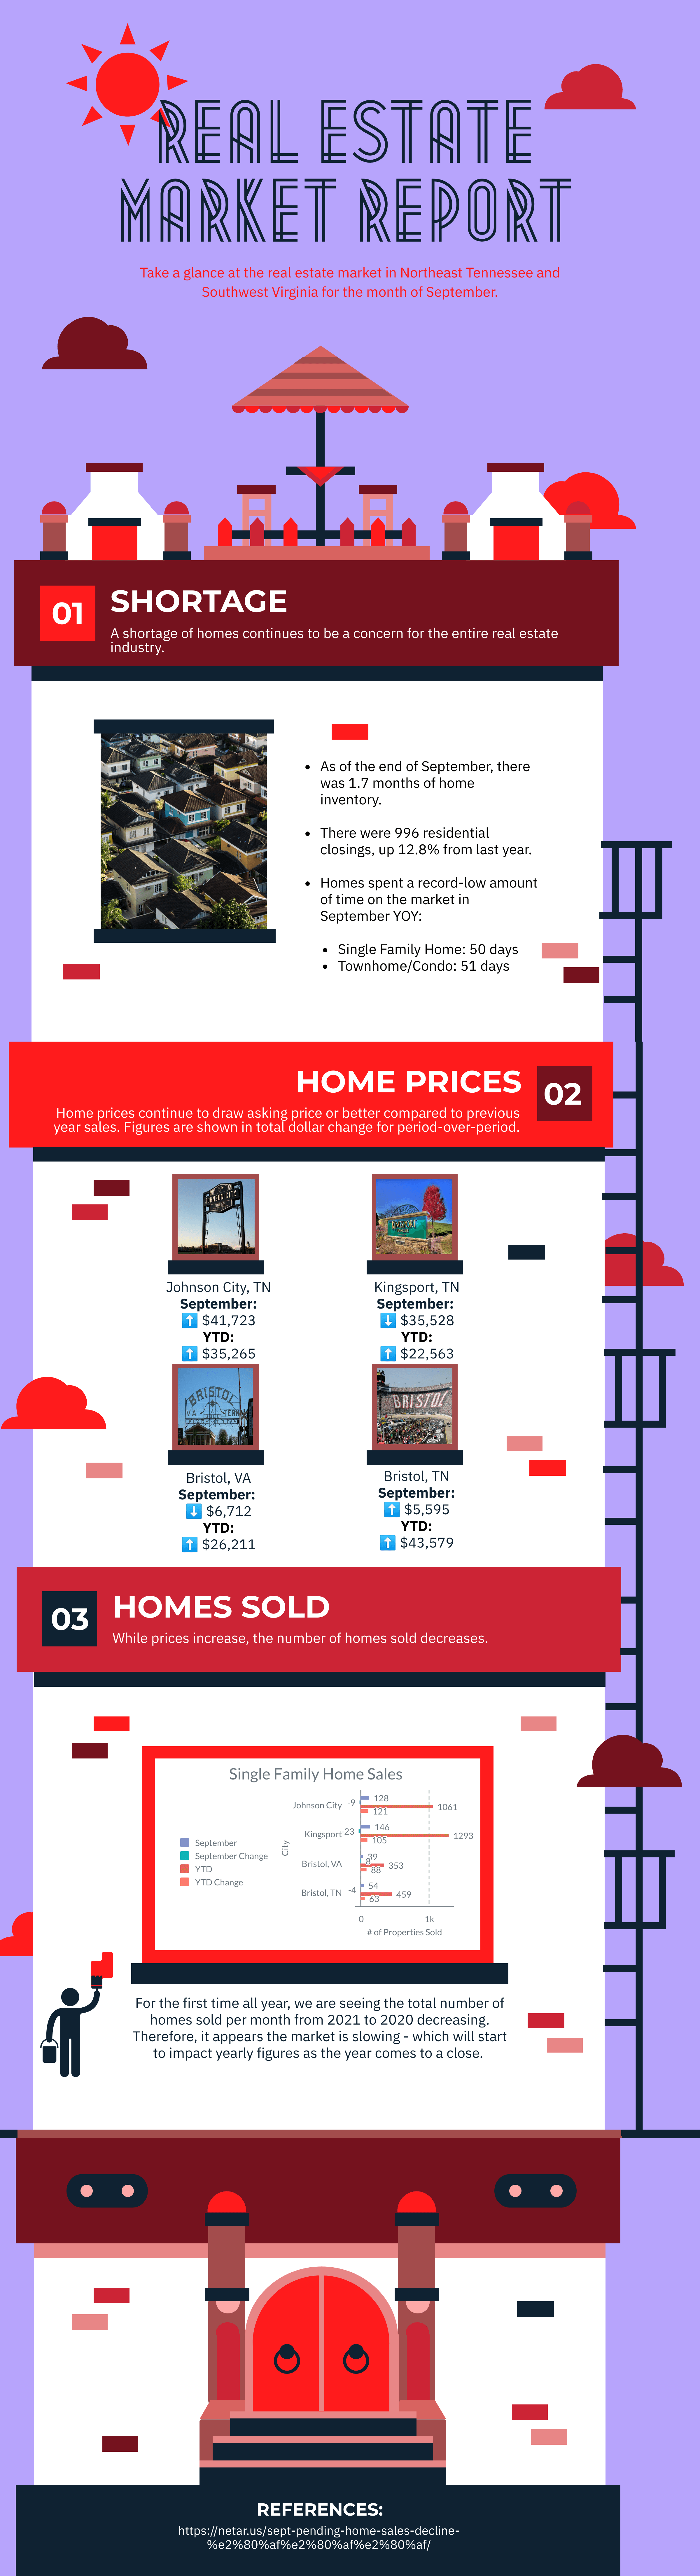 infographic, real estate, market report, tri cities